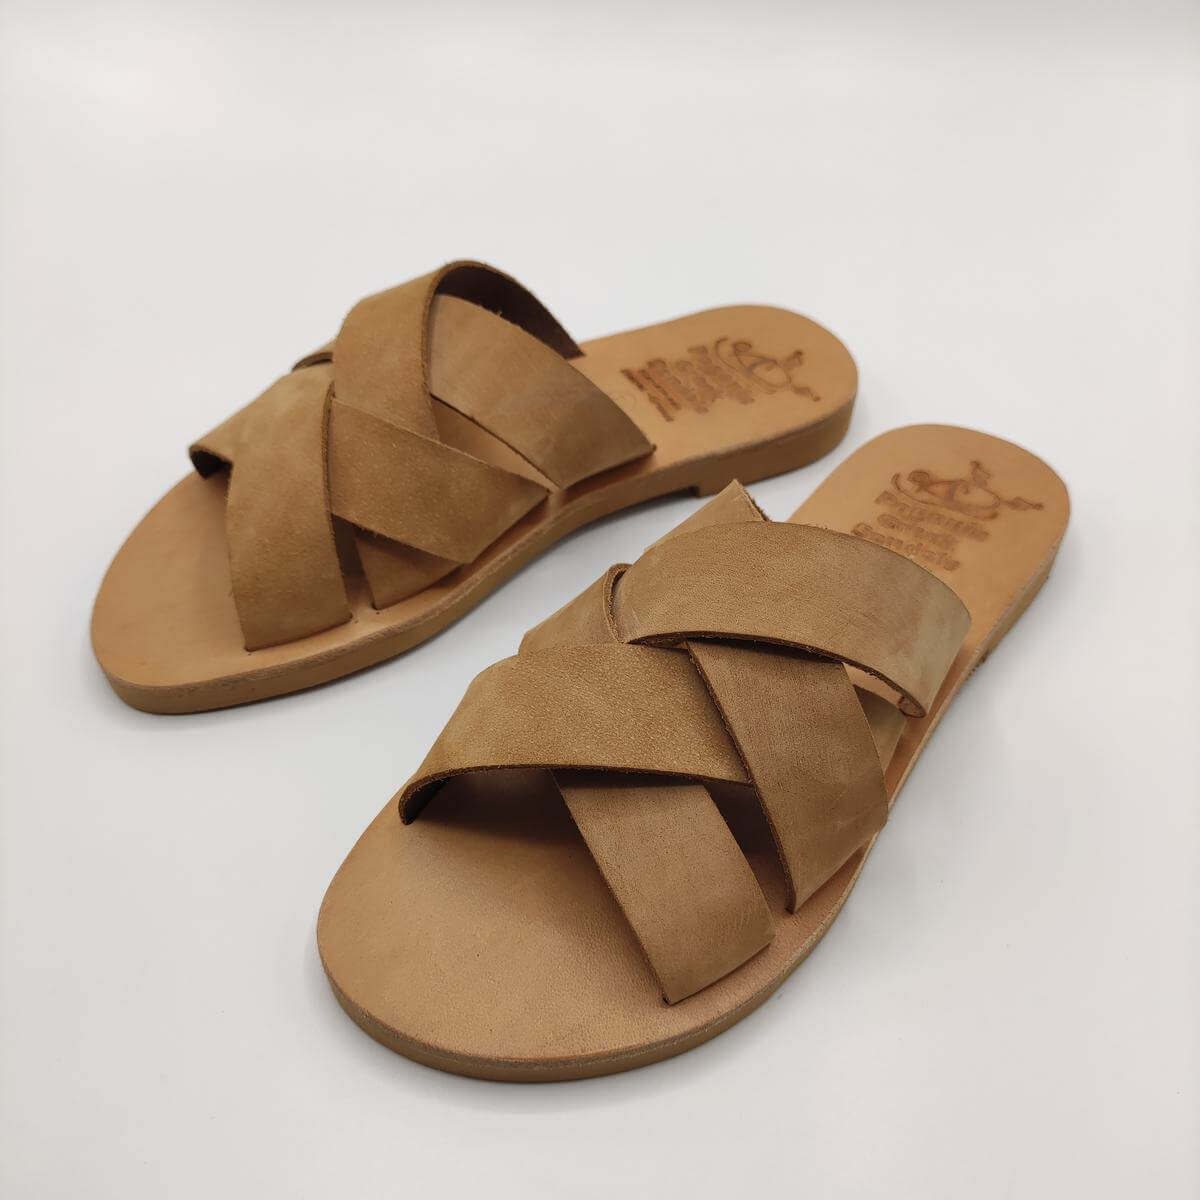 Criss Cross Woven Leather Slides Pagonis Nude Color